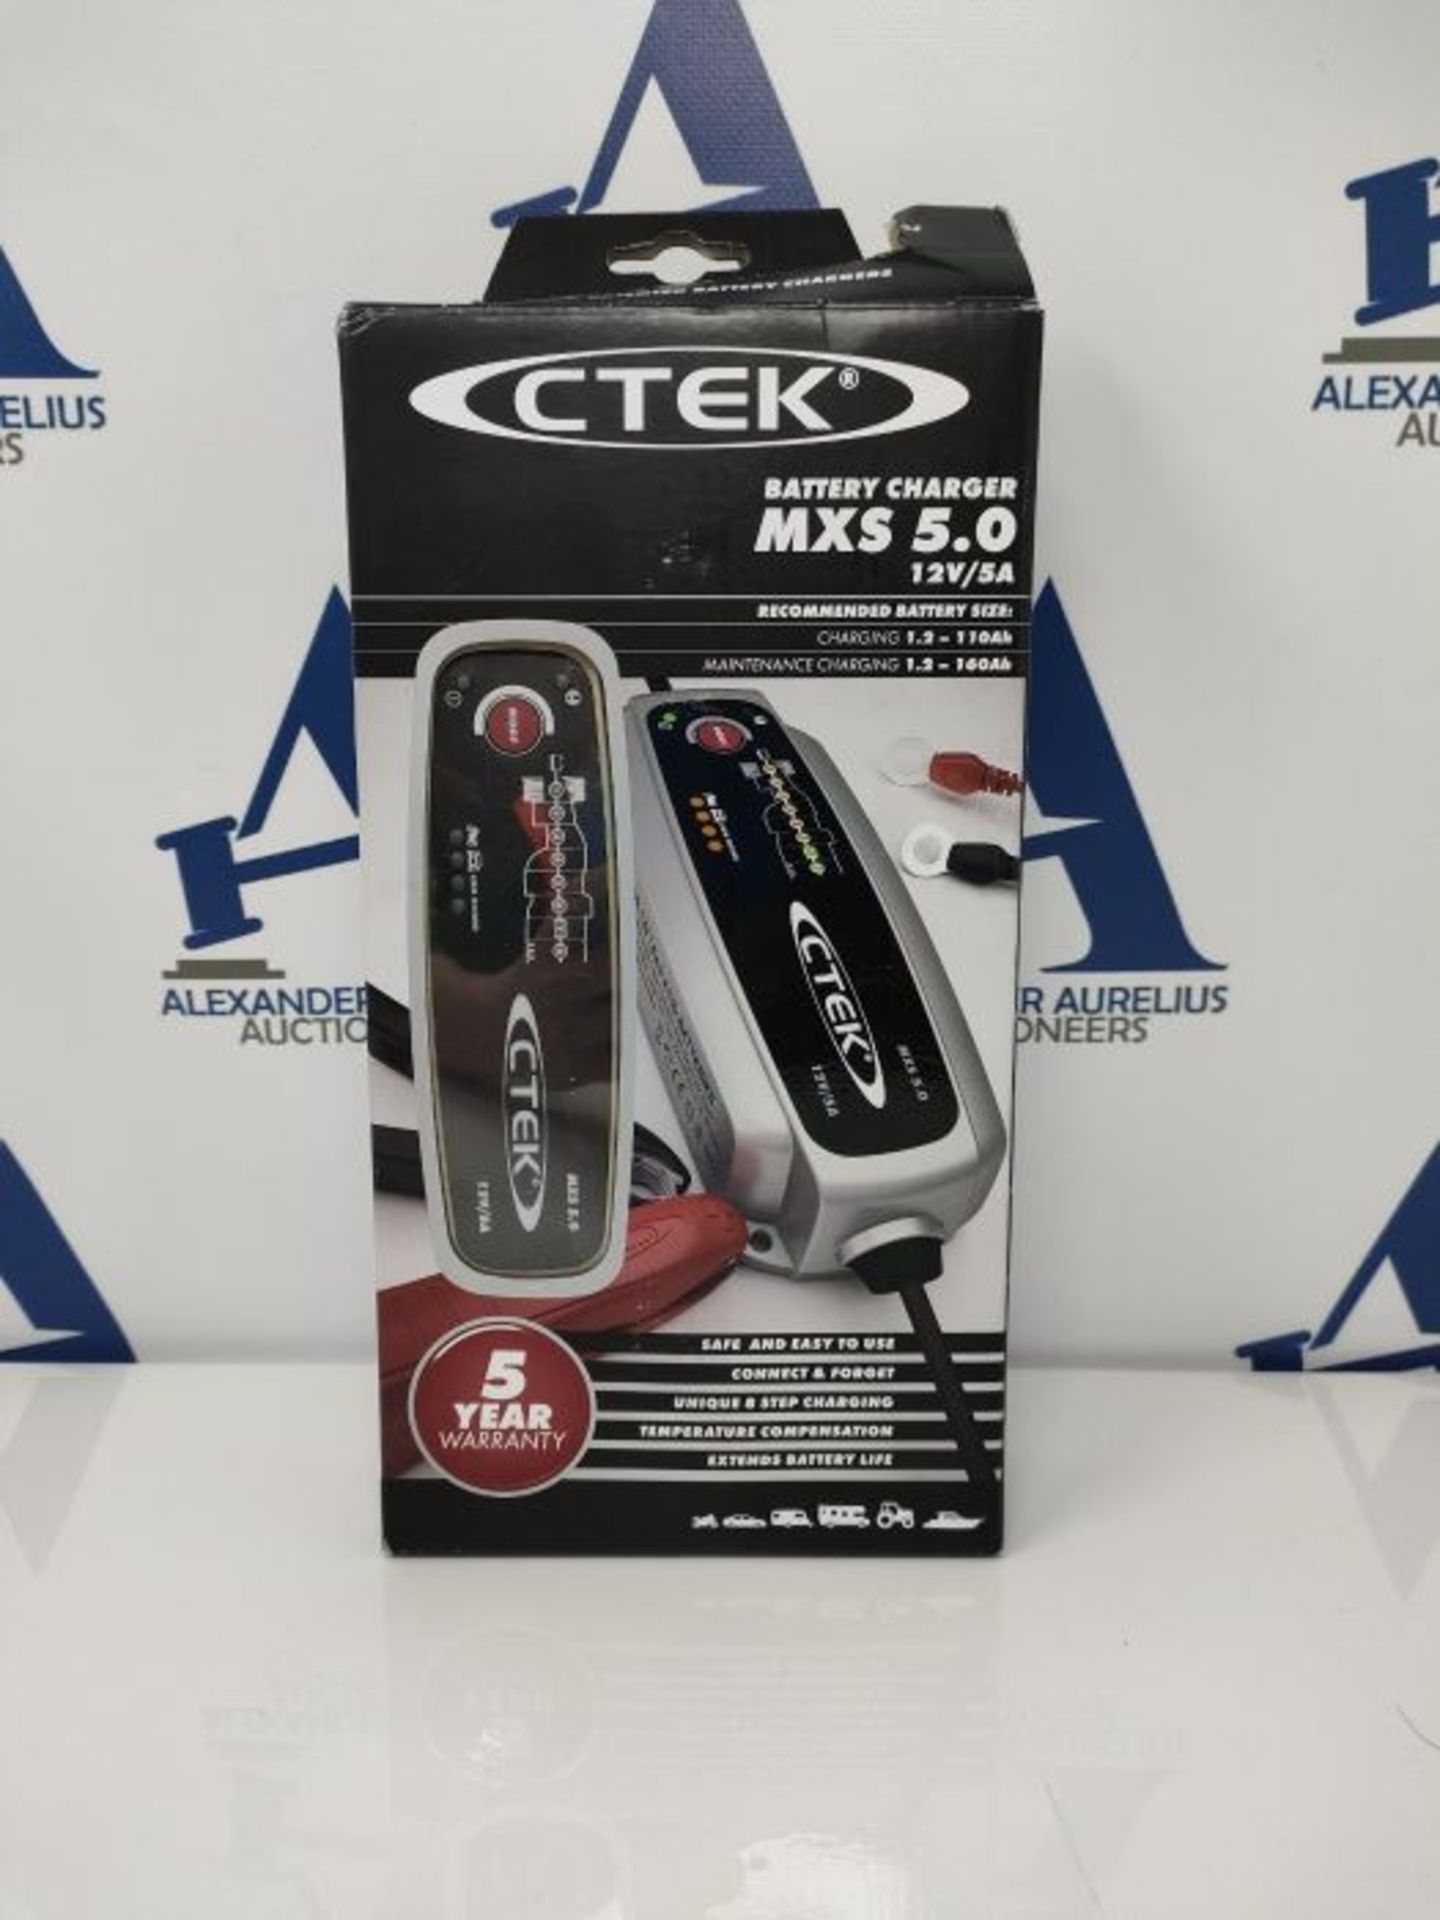 RRP £70.00 CTEK MXS 5.0 Battery Charger with Automatic Temperature Compensation - Image 2 of 3